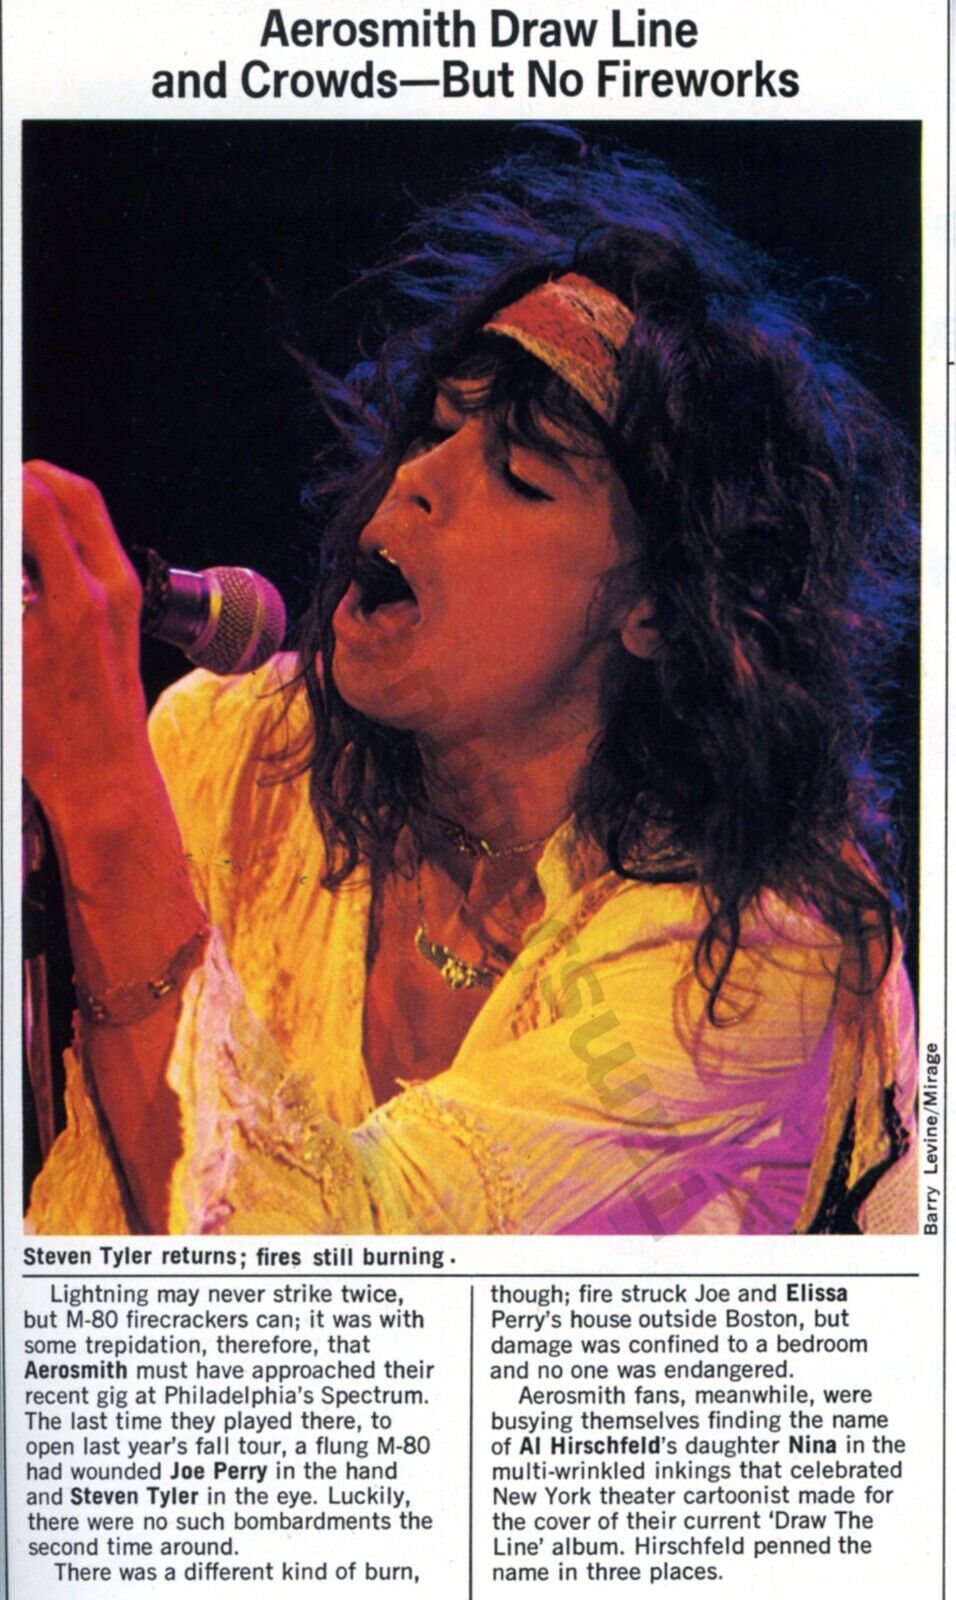 1978 Steven Tyler Magazine Page Photo Great For Collectors and Fans (648)